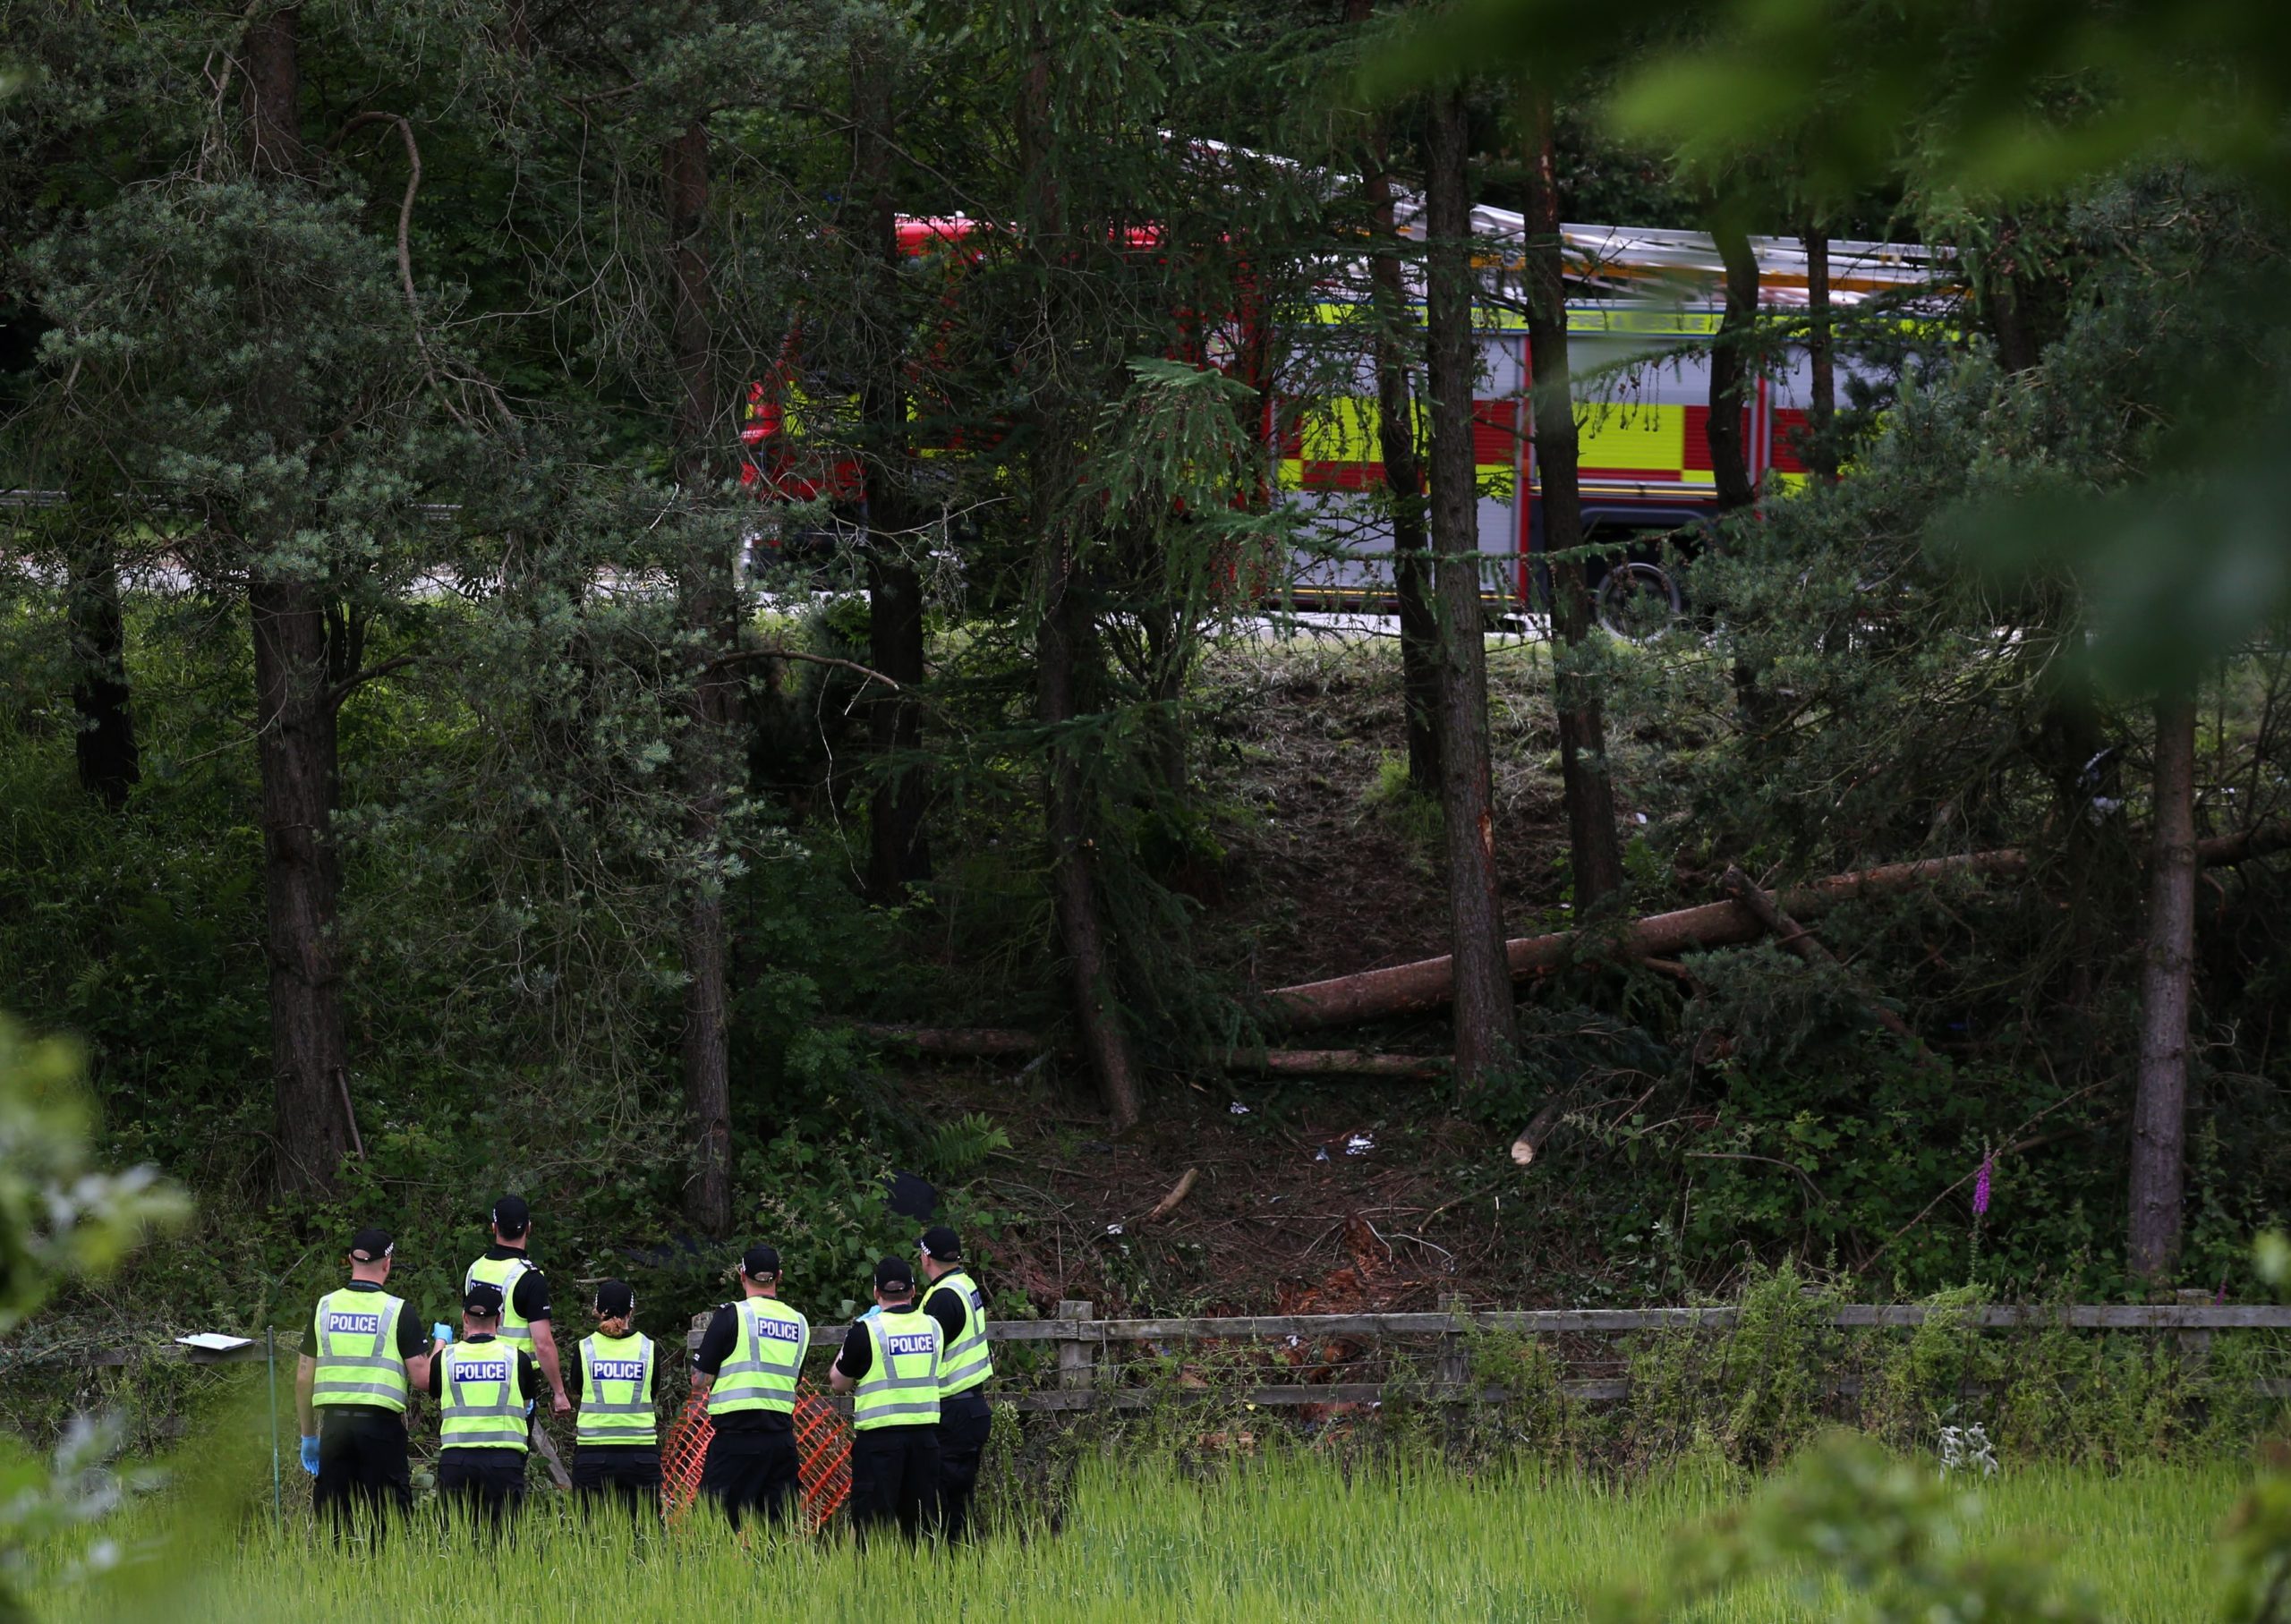 Police officers at the scene of crash tragedy near the M9 at Stirling on July 9, 2015, four days after the accident was first reported